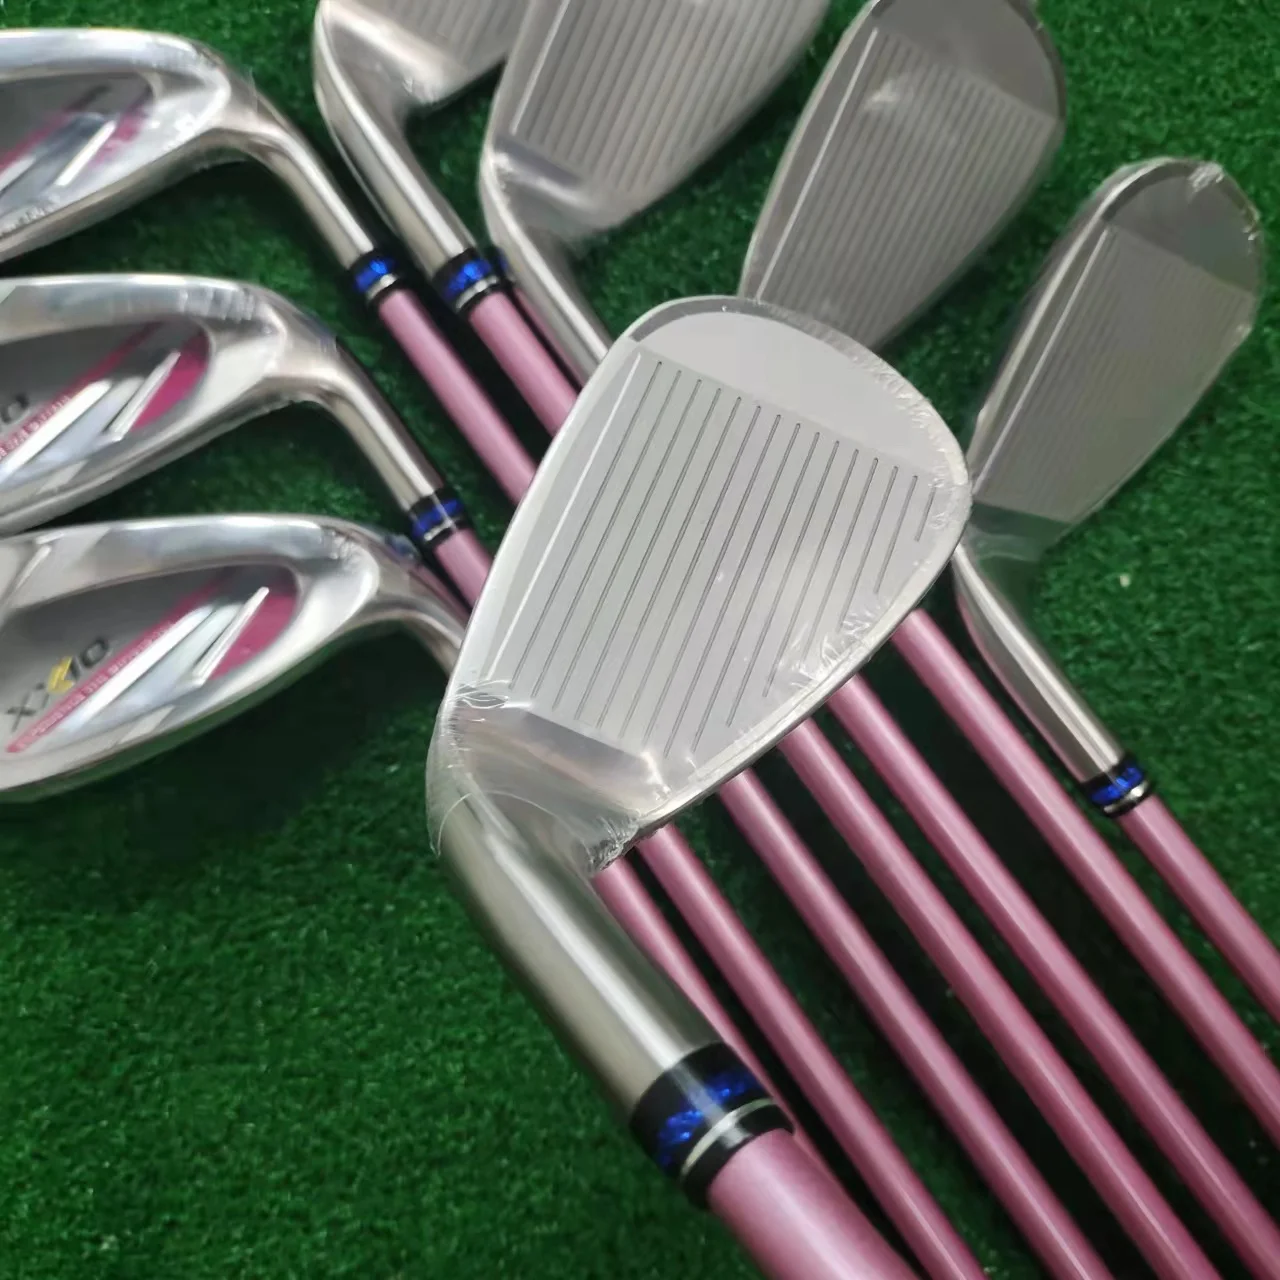 Brand new XXIO MP1100 golf club full set of ladies irons carbon shaft 5~9 P A S iron including head cover